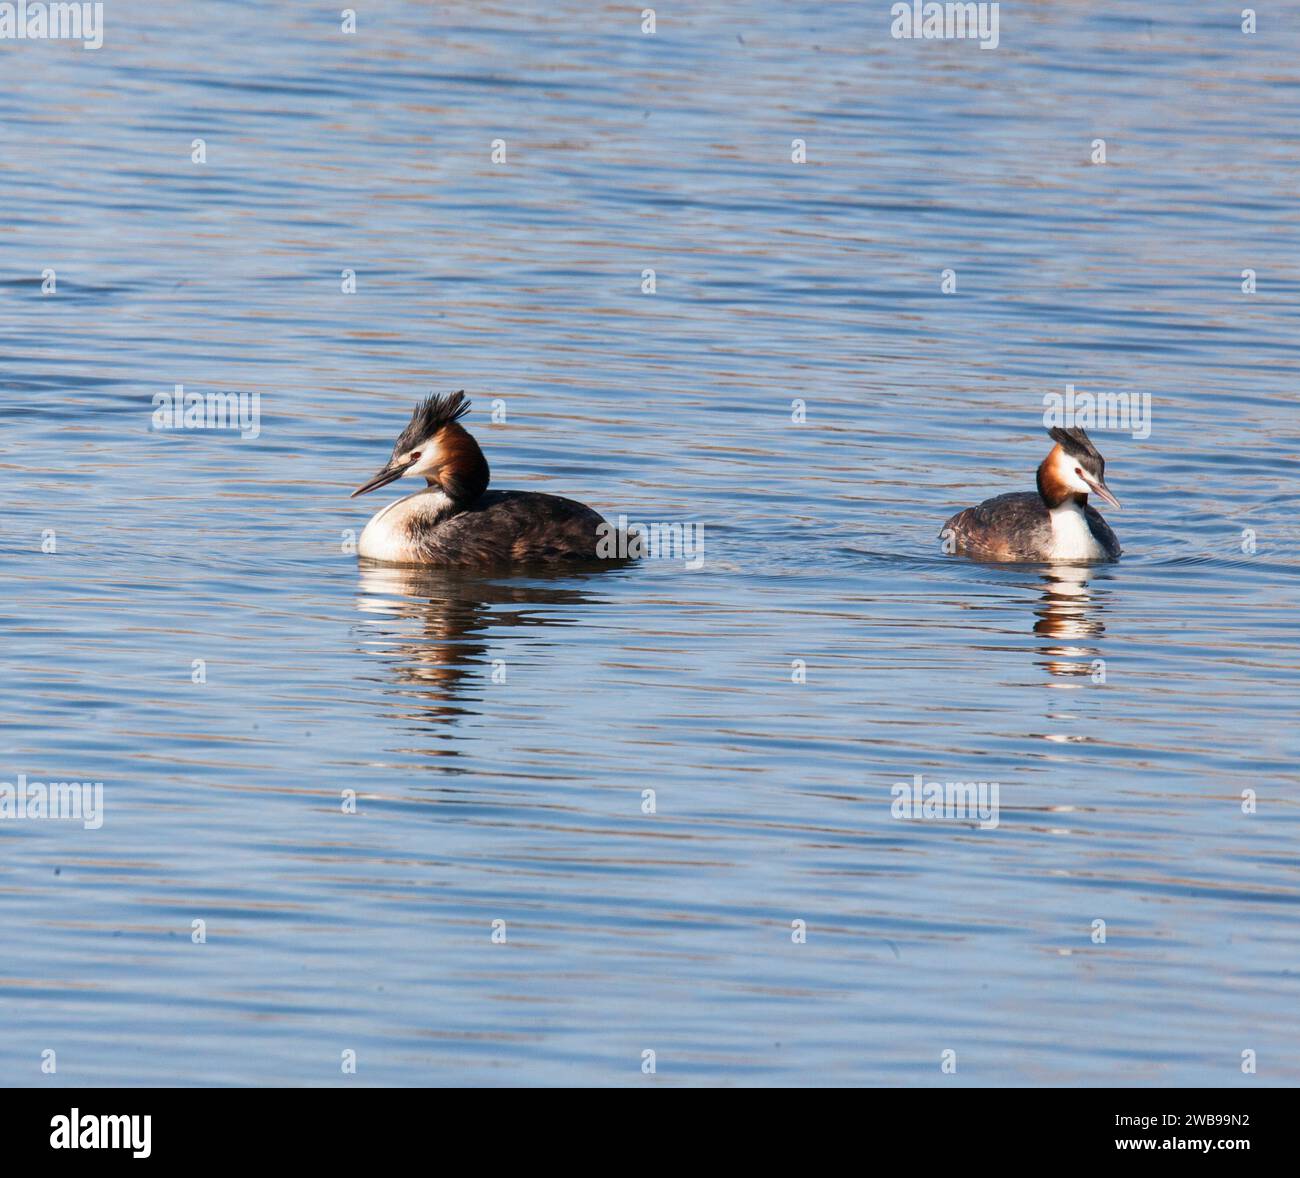 GREAT CRESTED GREBE  Podiceps cristatus on water Stock Photo